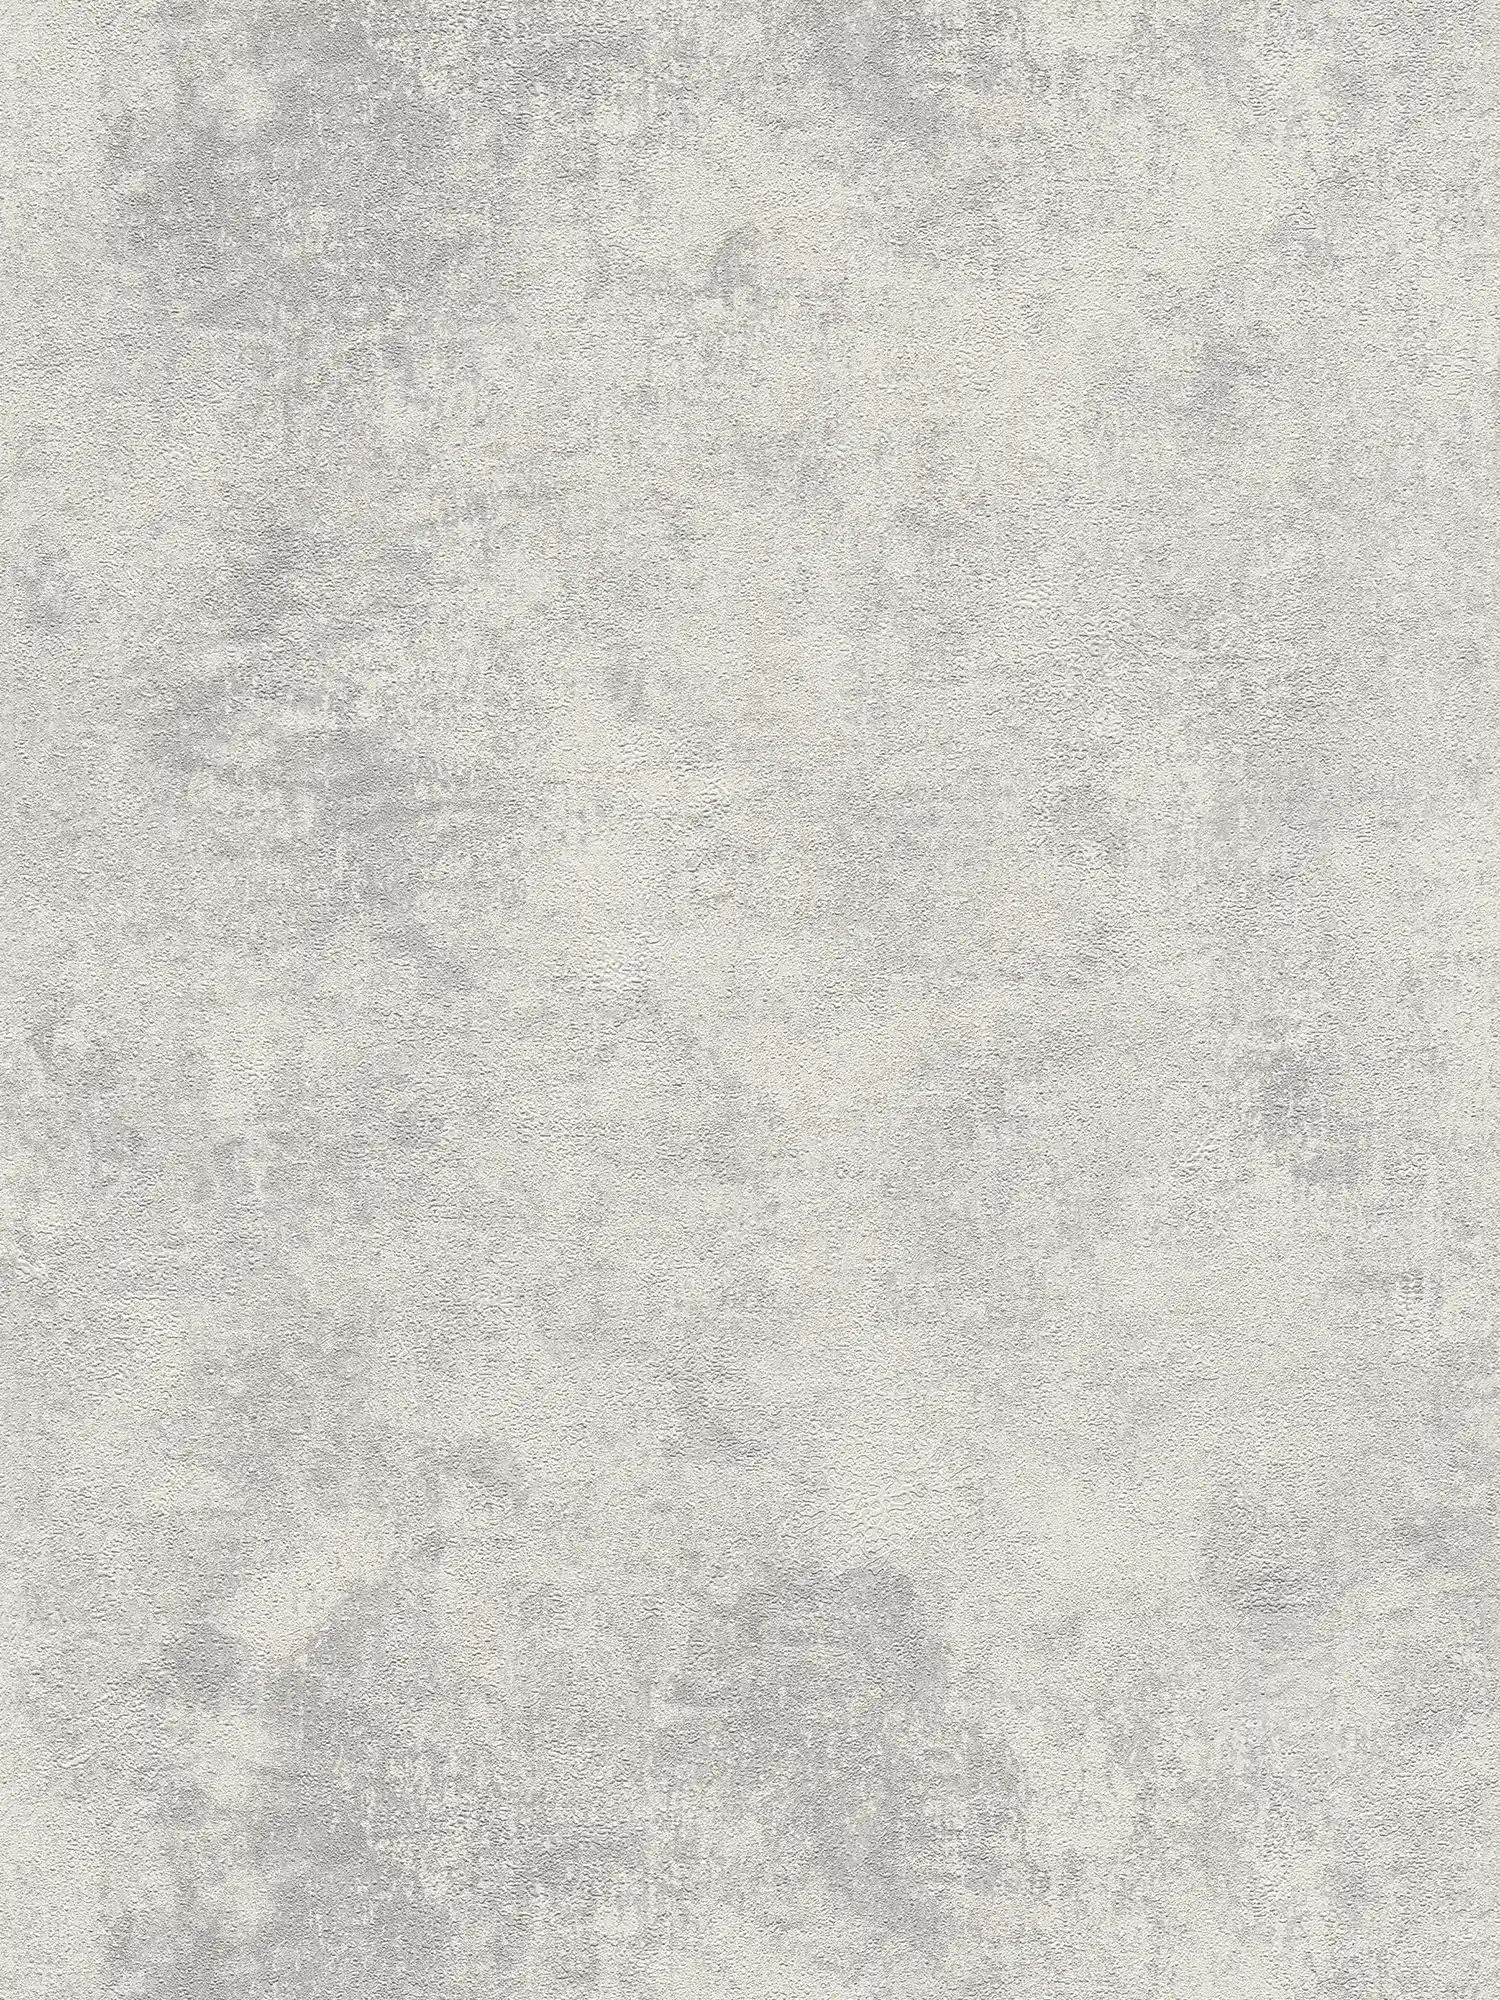 Non-woven wallpaper with disc plaster look & texture pattern - grey, silver
